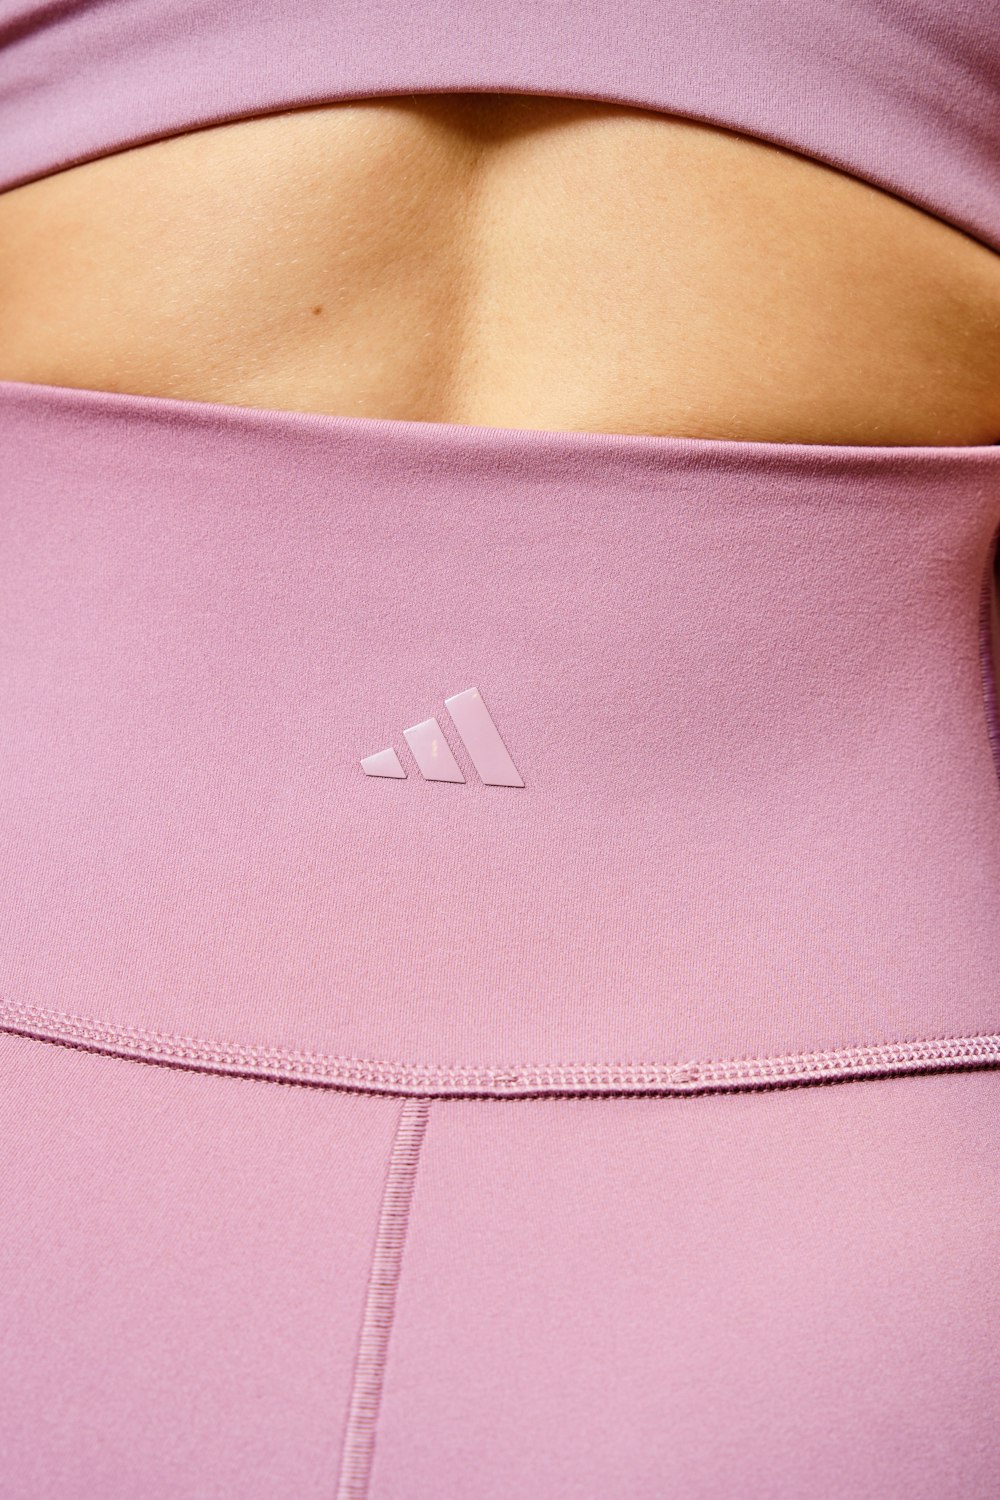 a close up of a person wearing a pink top